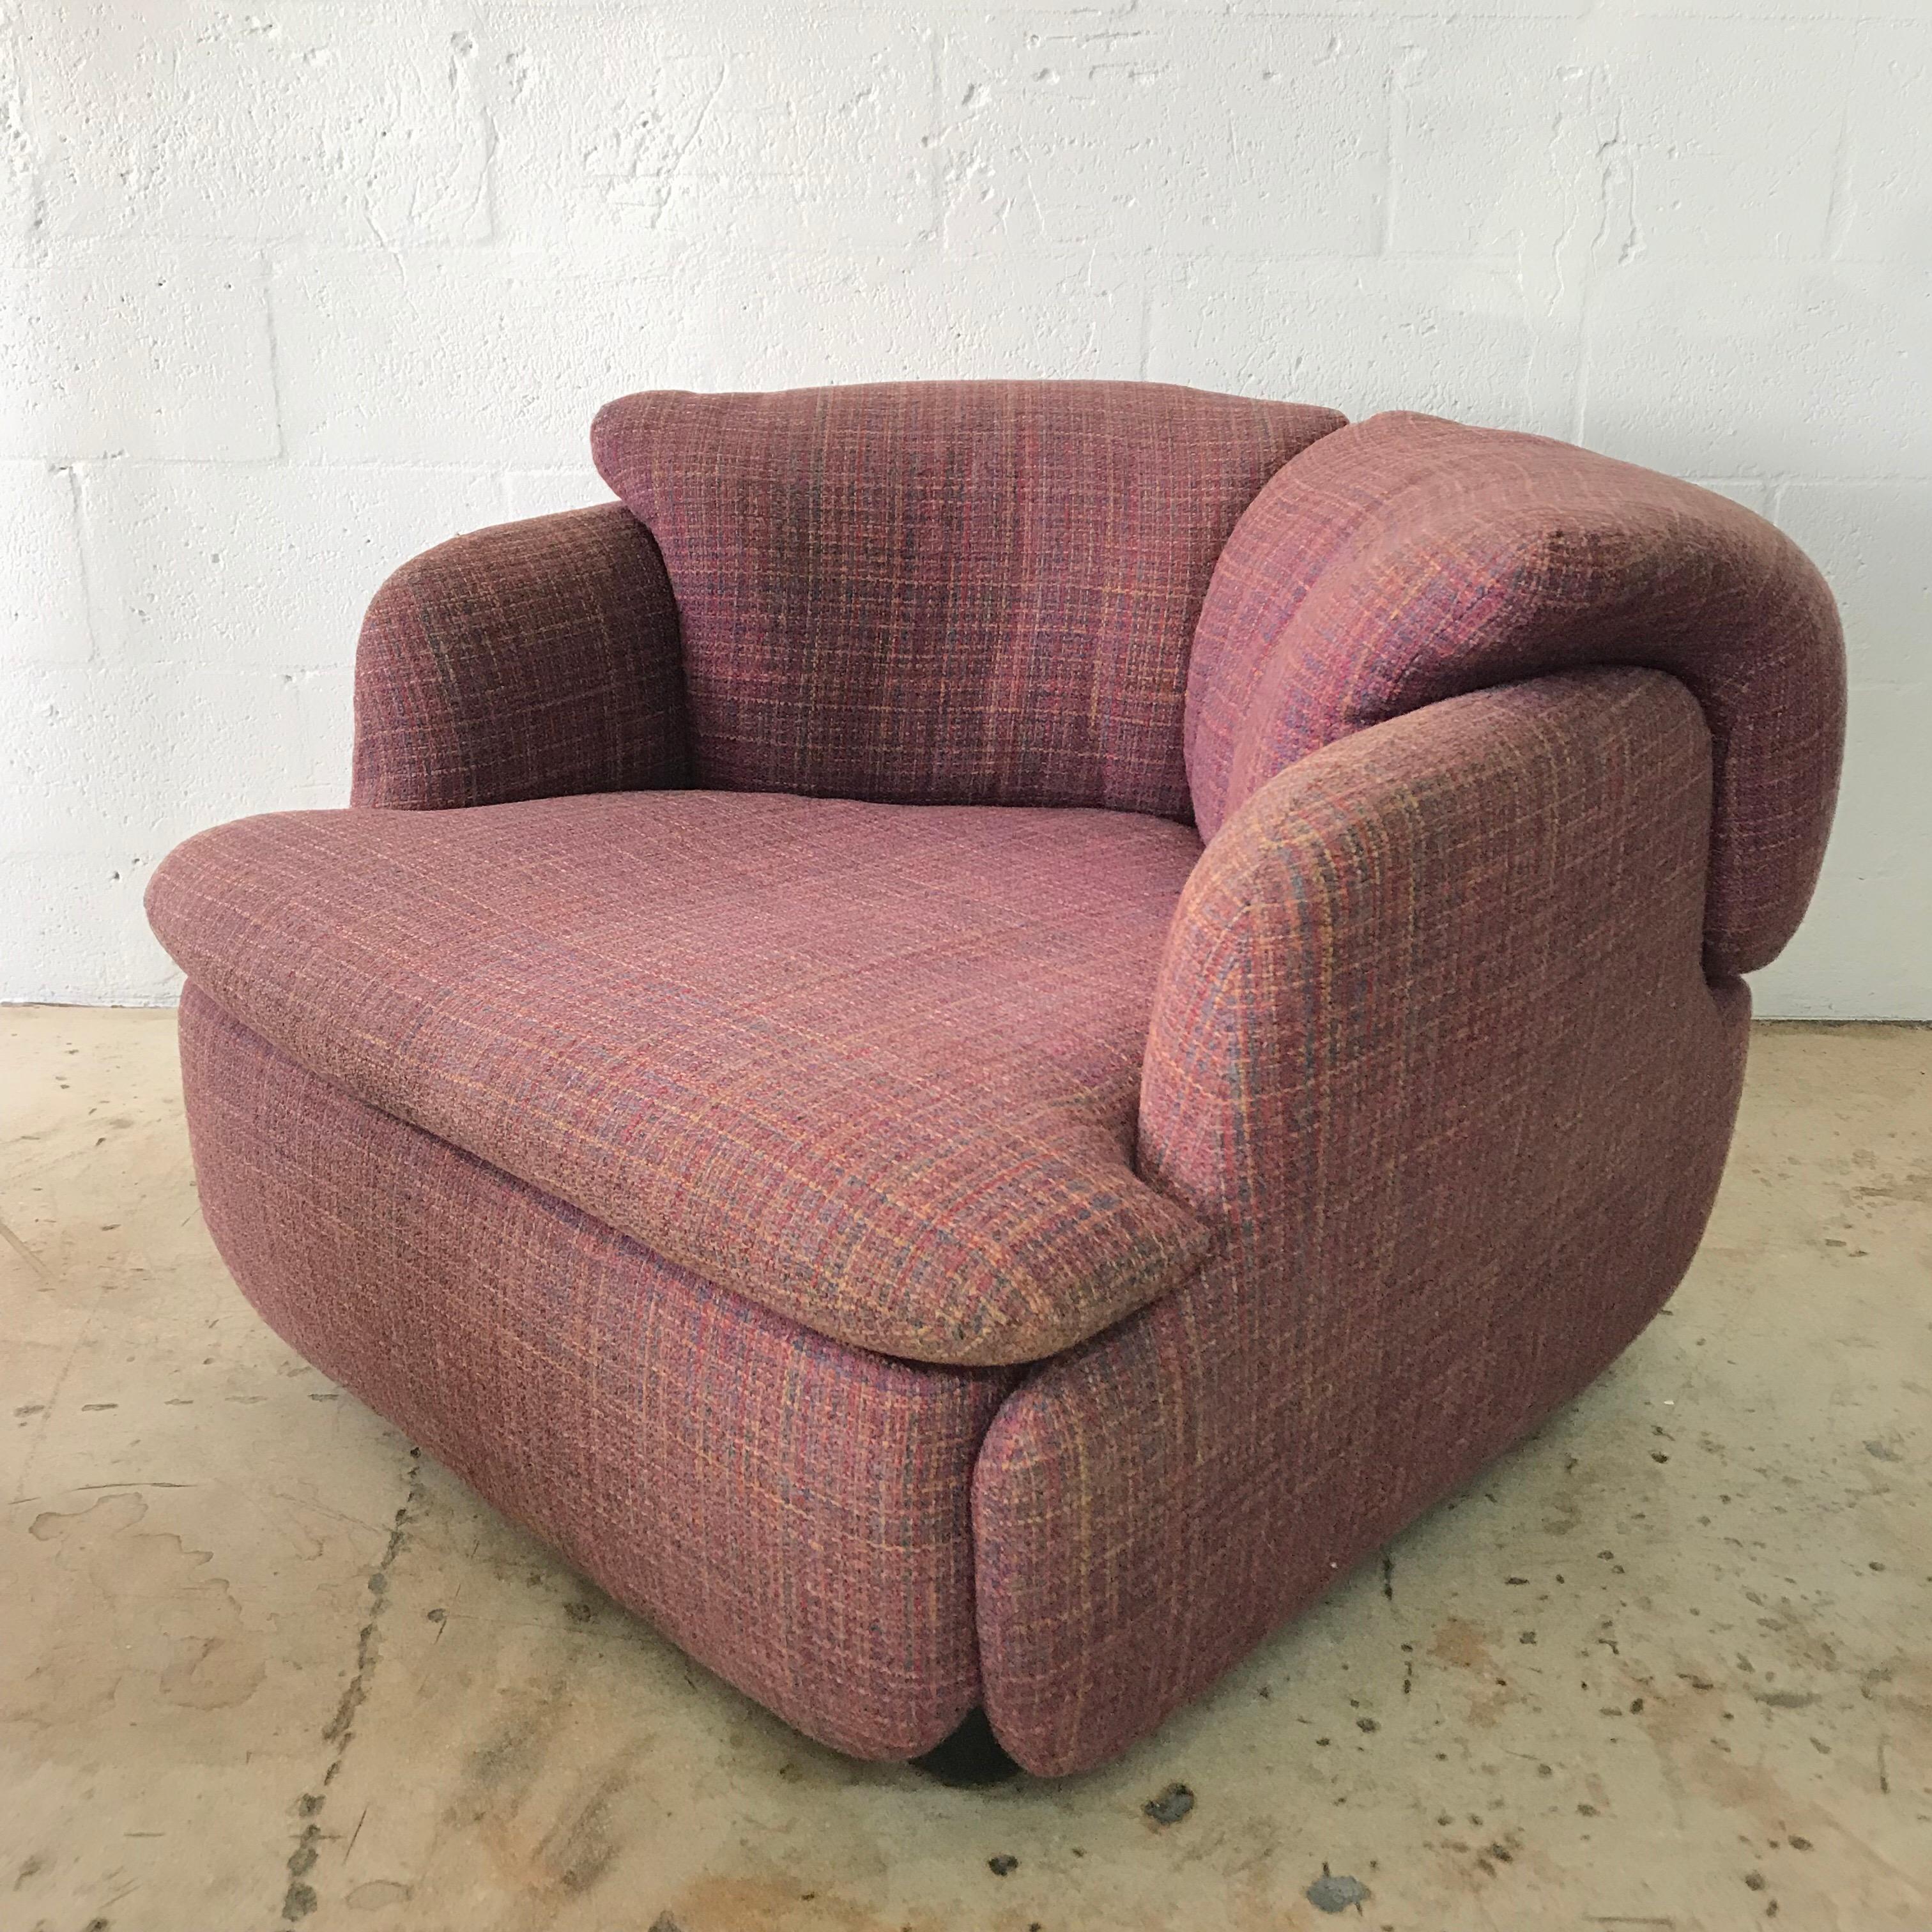 20th Century Pair of Pink Tweed “Confidential” Chairs by Alberto Rosselli for Saporiti Italia